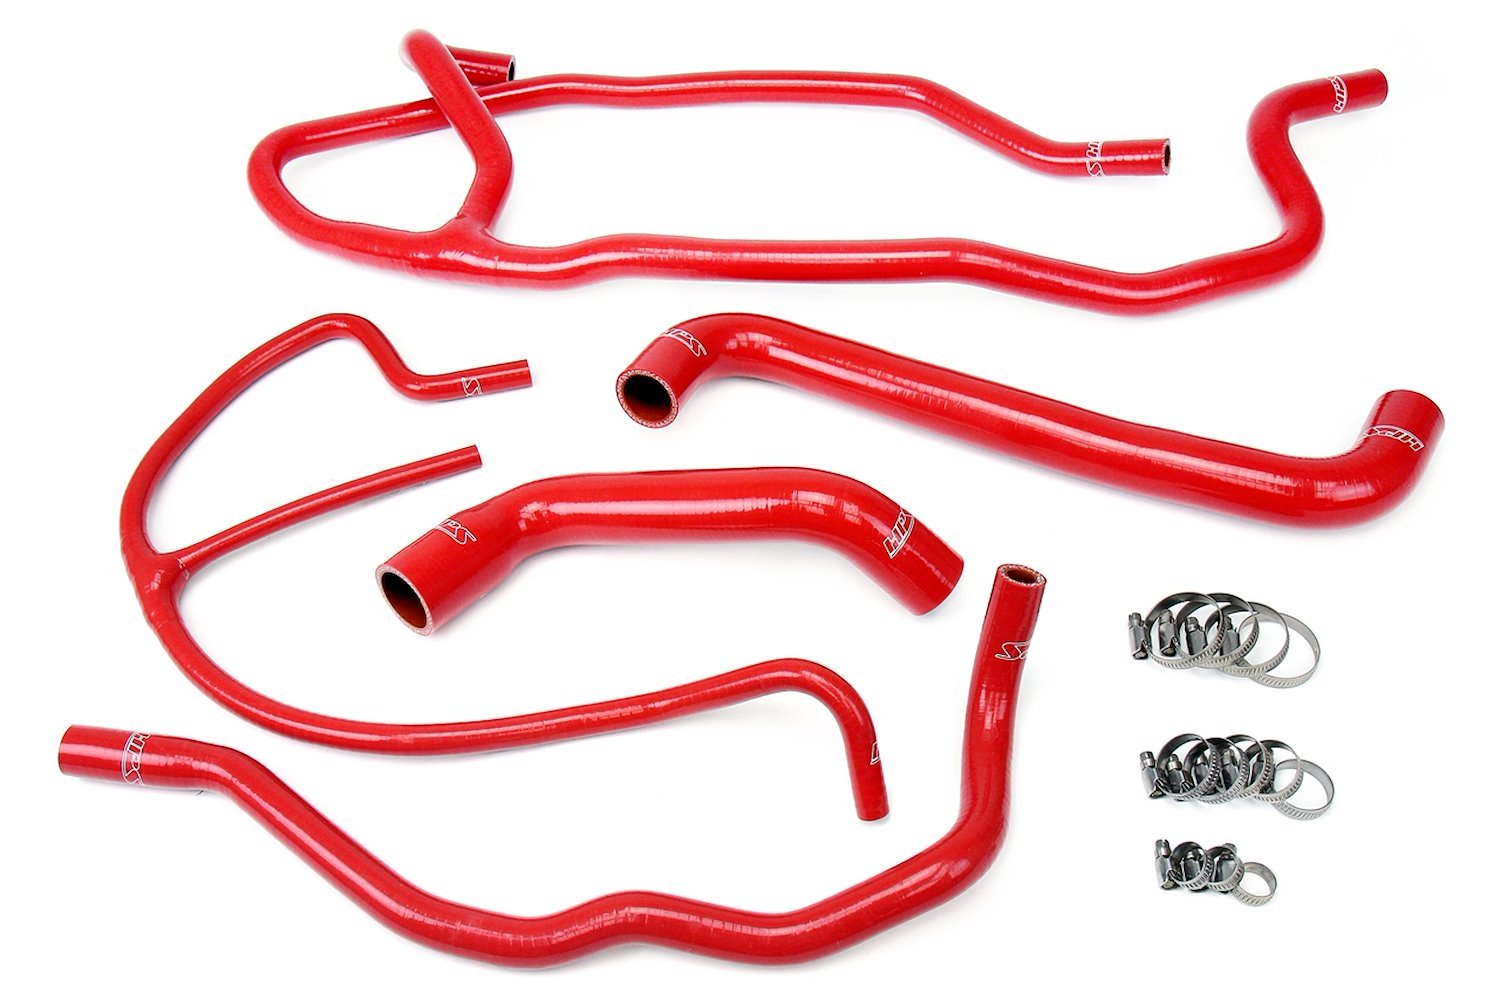 57-1277-RED Coolant Hose Kit, High-Temp 3-Ply Reinforced Silicone, Replace Rubber Radiator Heater Coolant Hoses